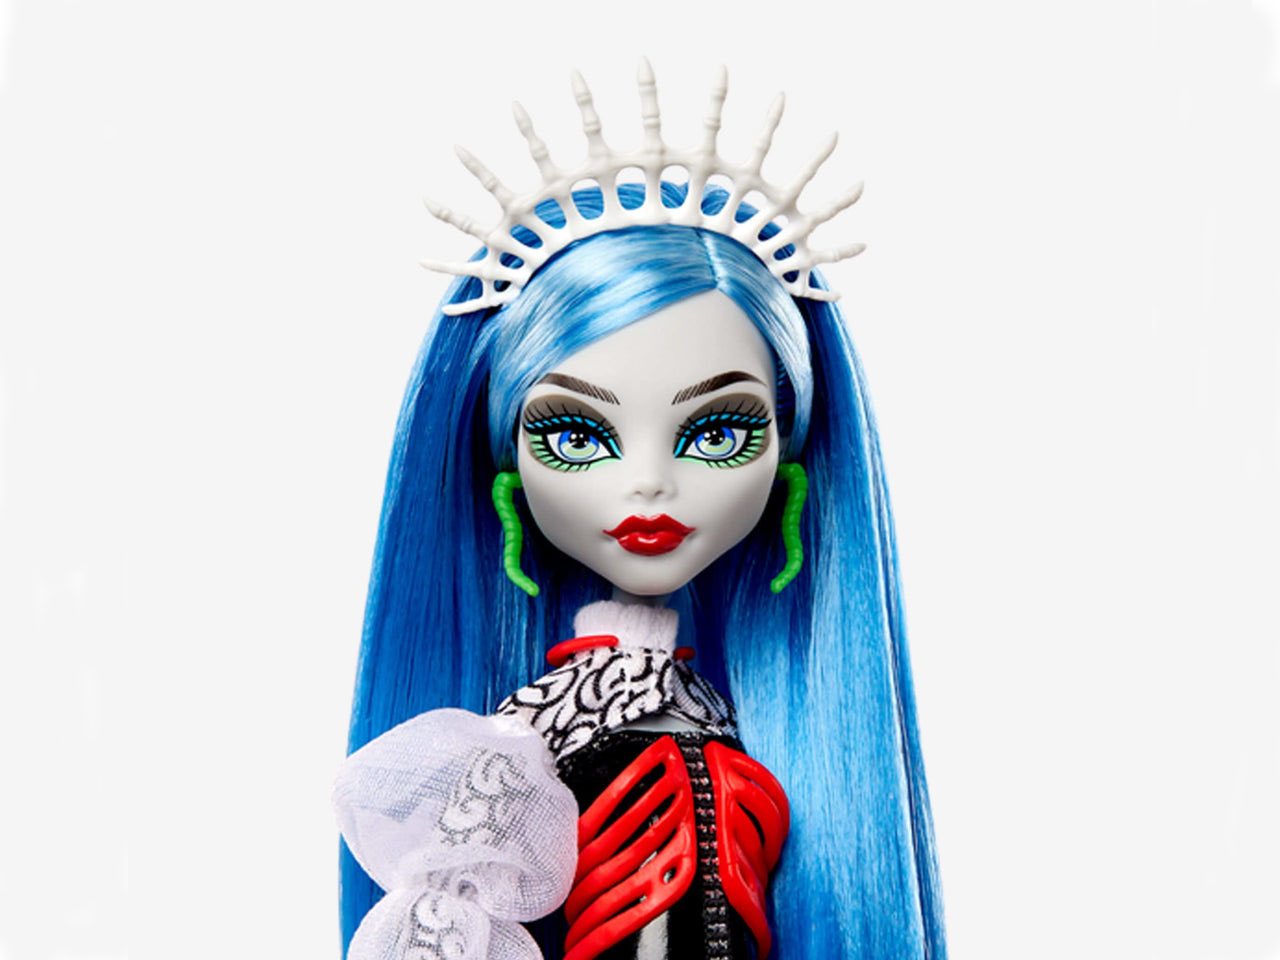 Monster High Doll - Ghoulia Yelps - Grey with Blue Hair - wide 7